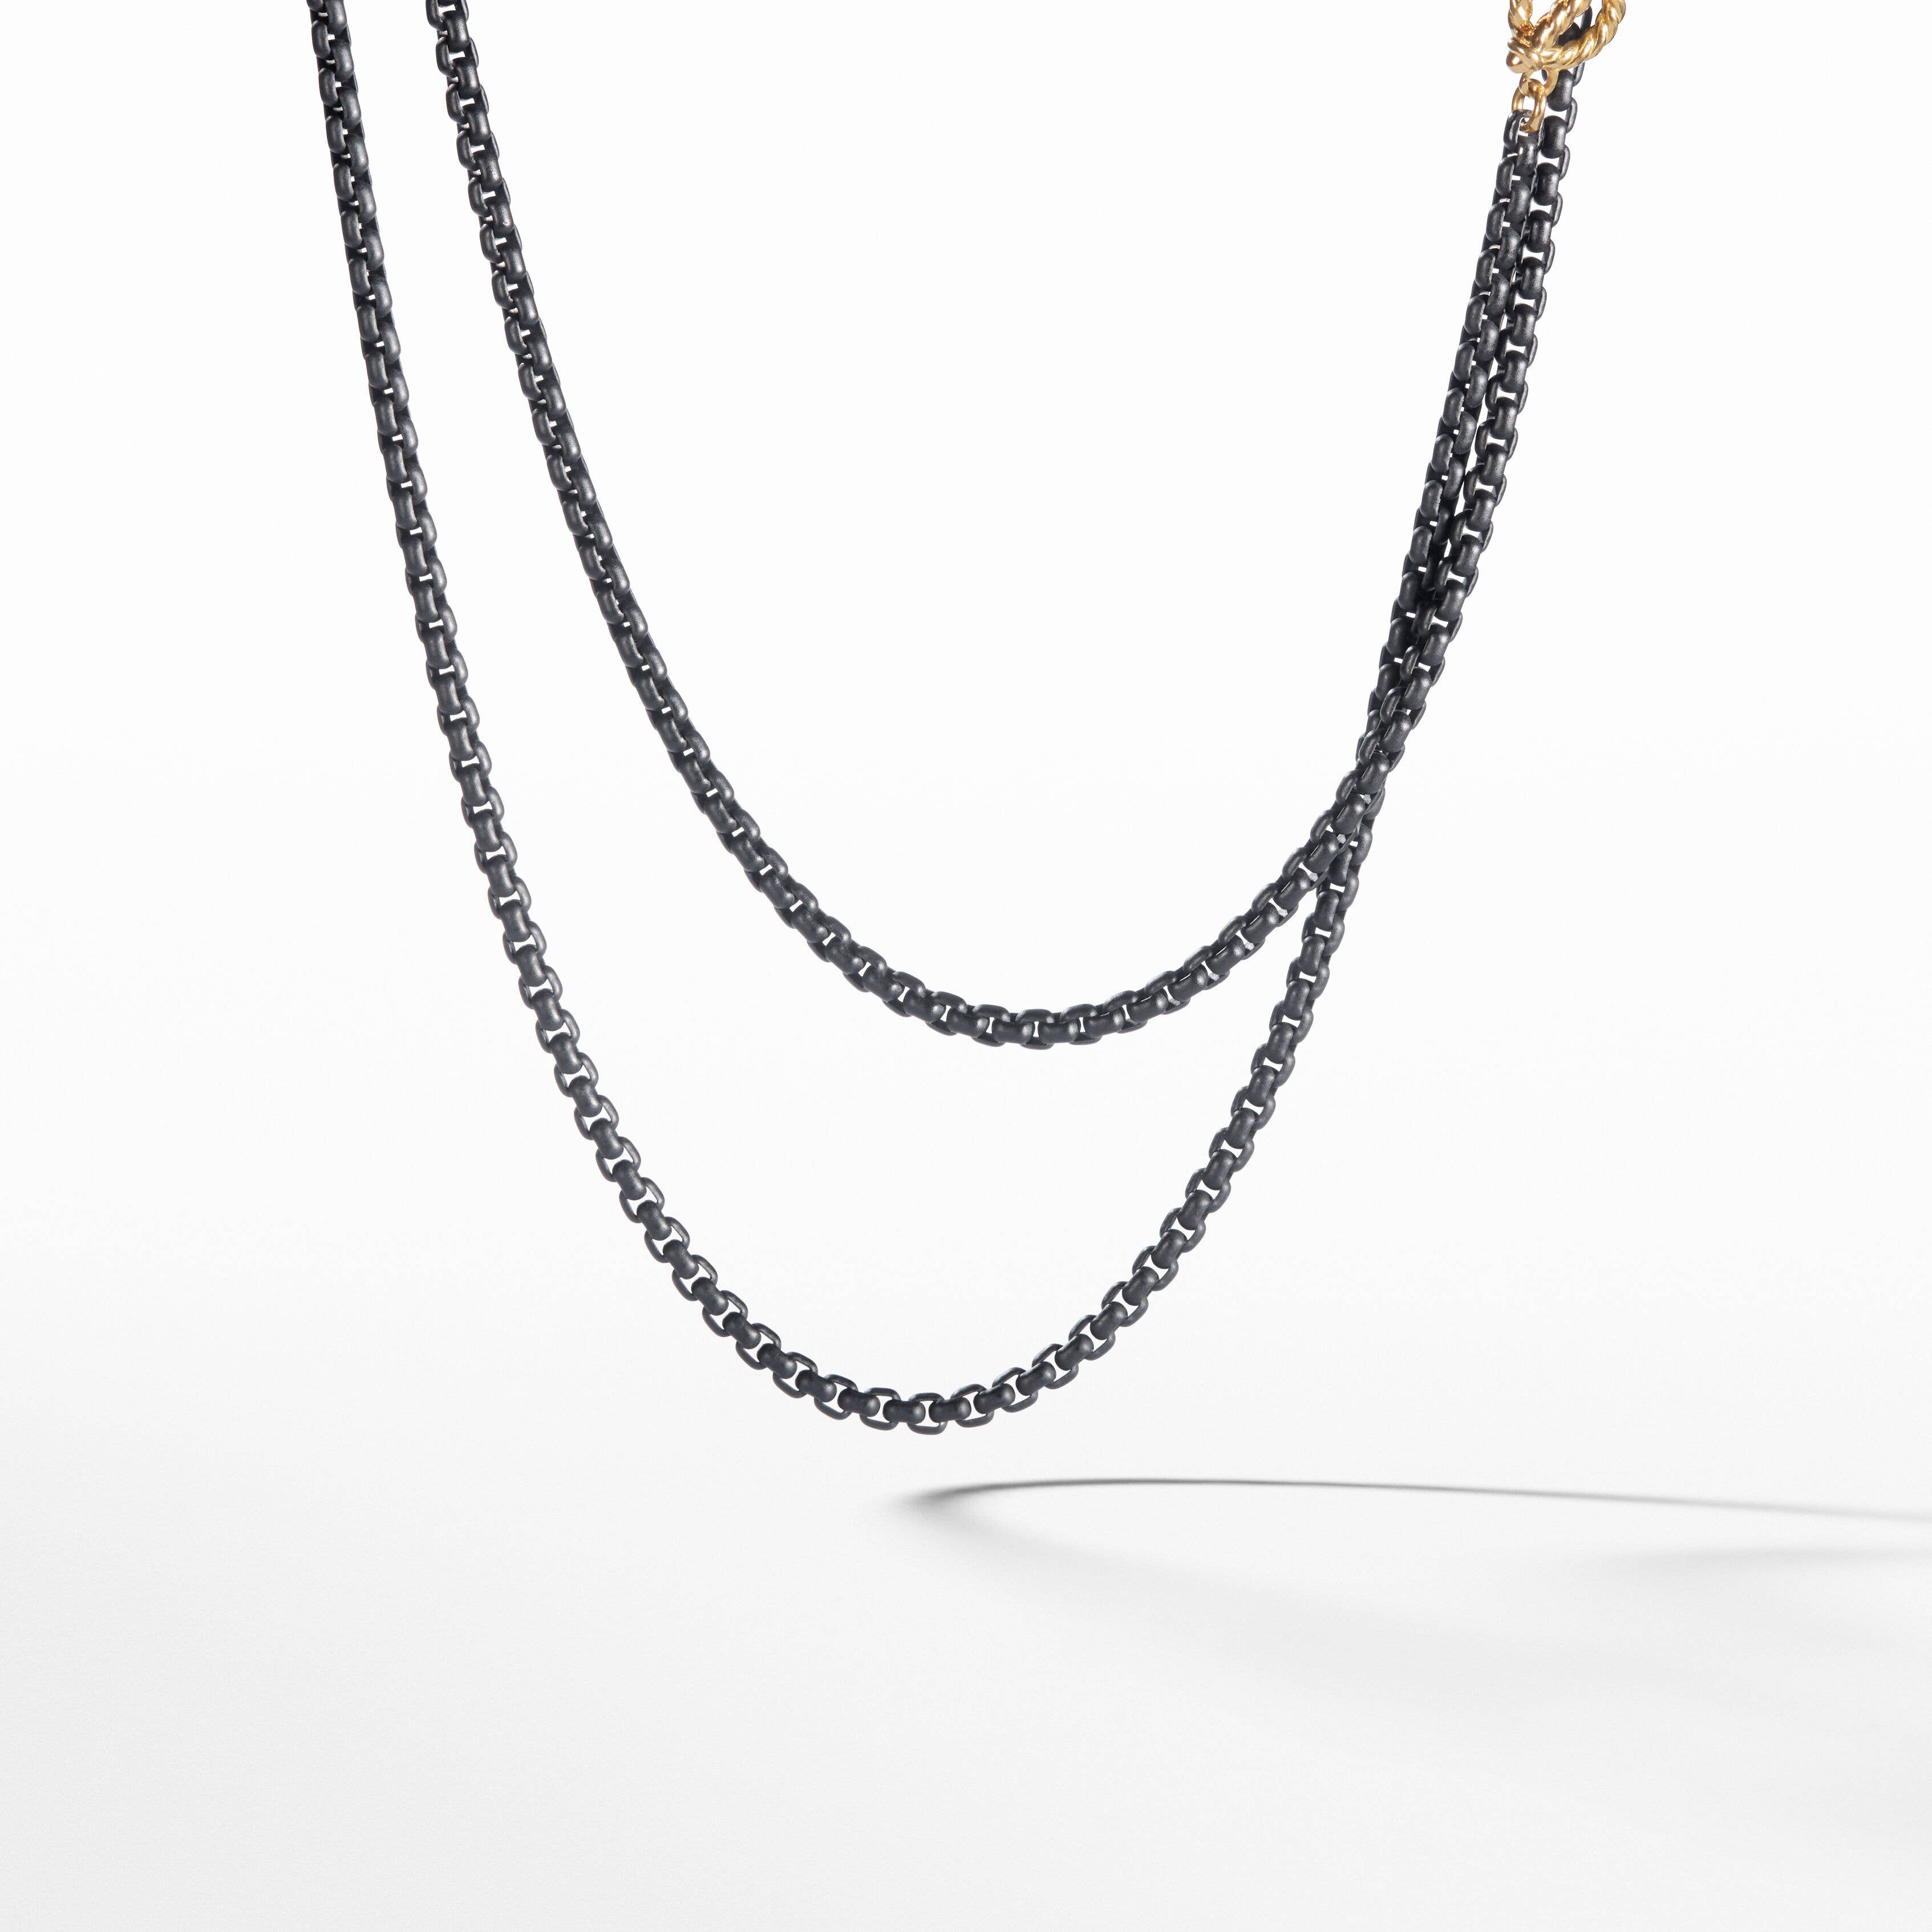 DY Bel Aire Chain Necklace in Black with 14K Yellow Gold Accents